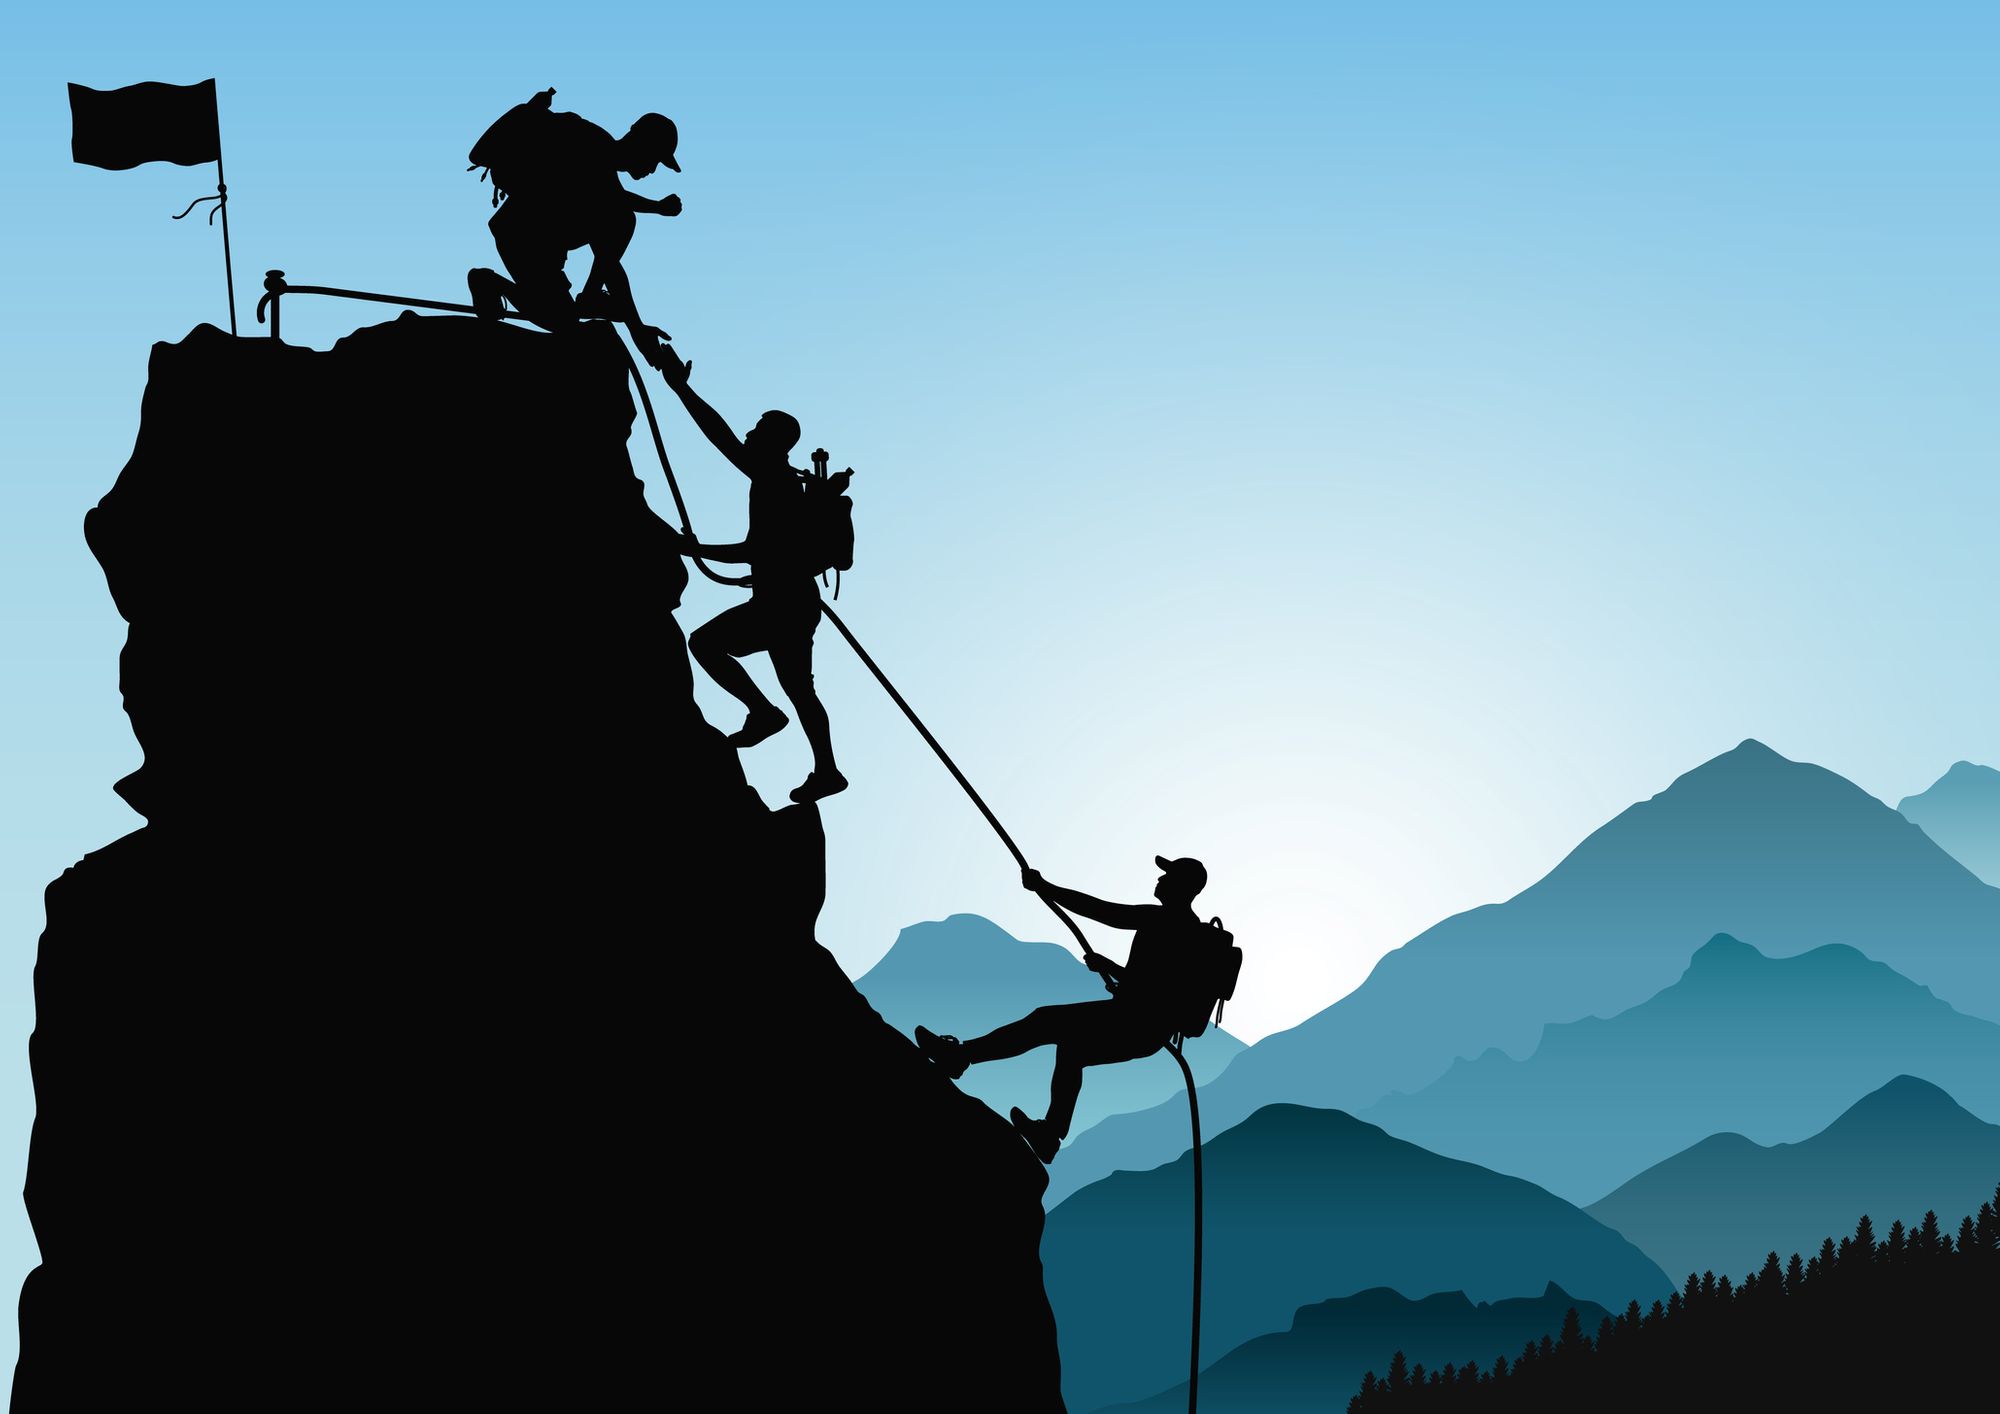 An illustration of three silhouetted figures helping each other climb a mountain.